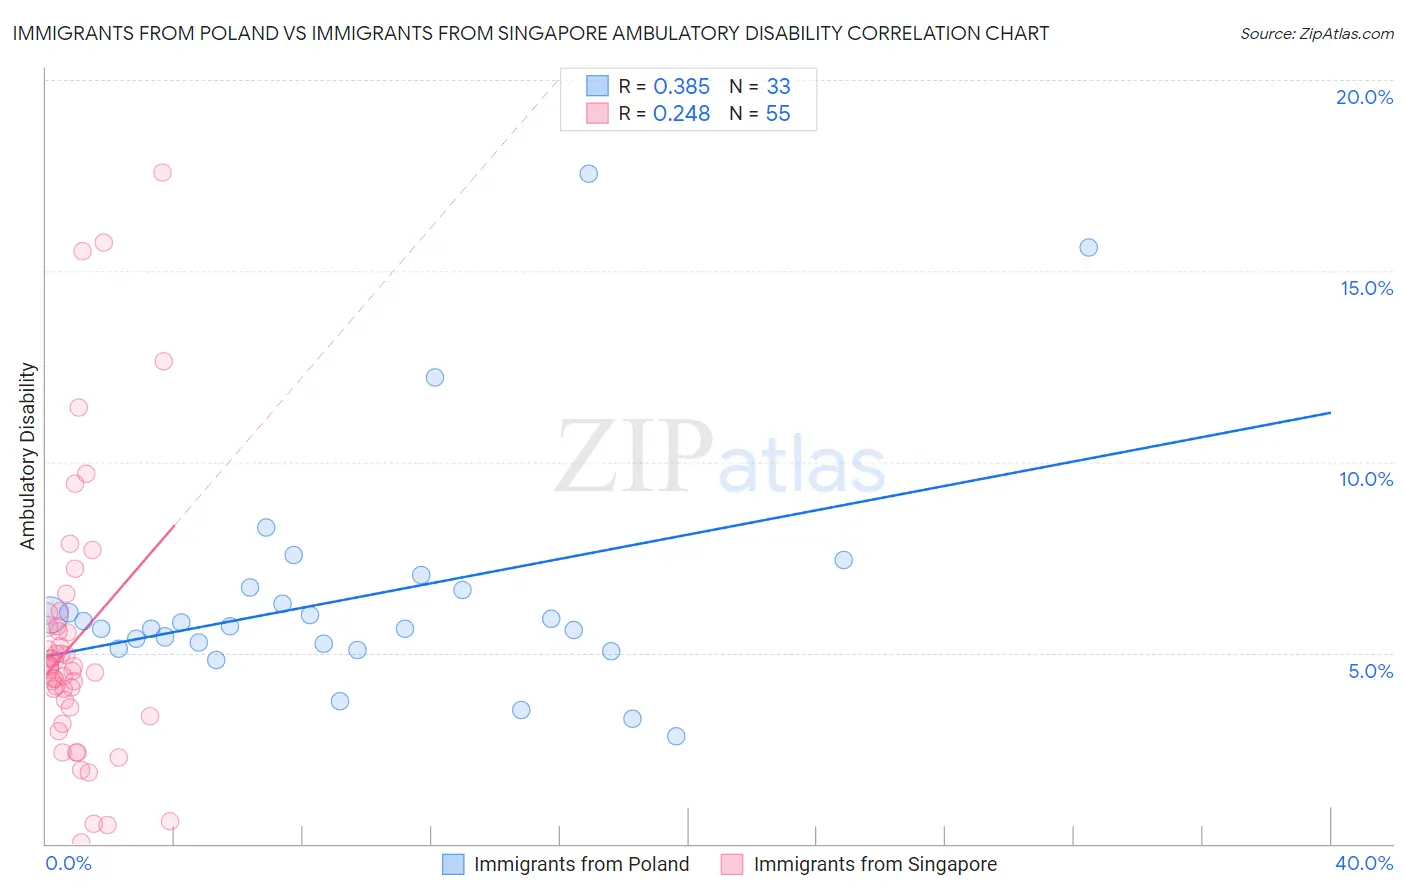 Immigrants from Poland vs Immigrants from Singapore Ambulatory Disability